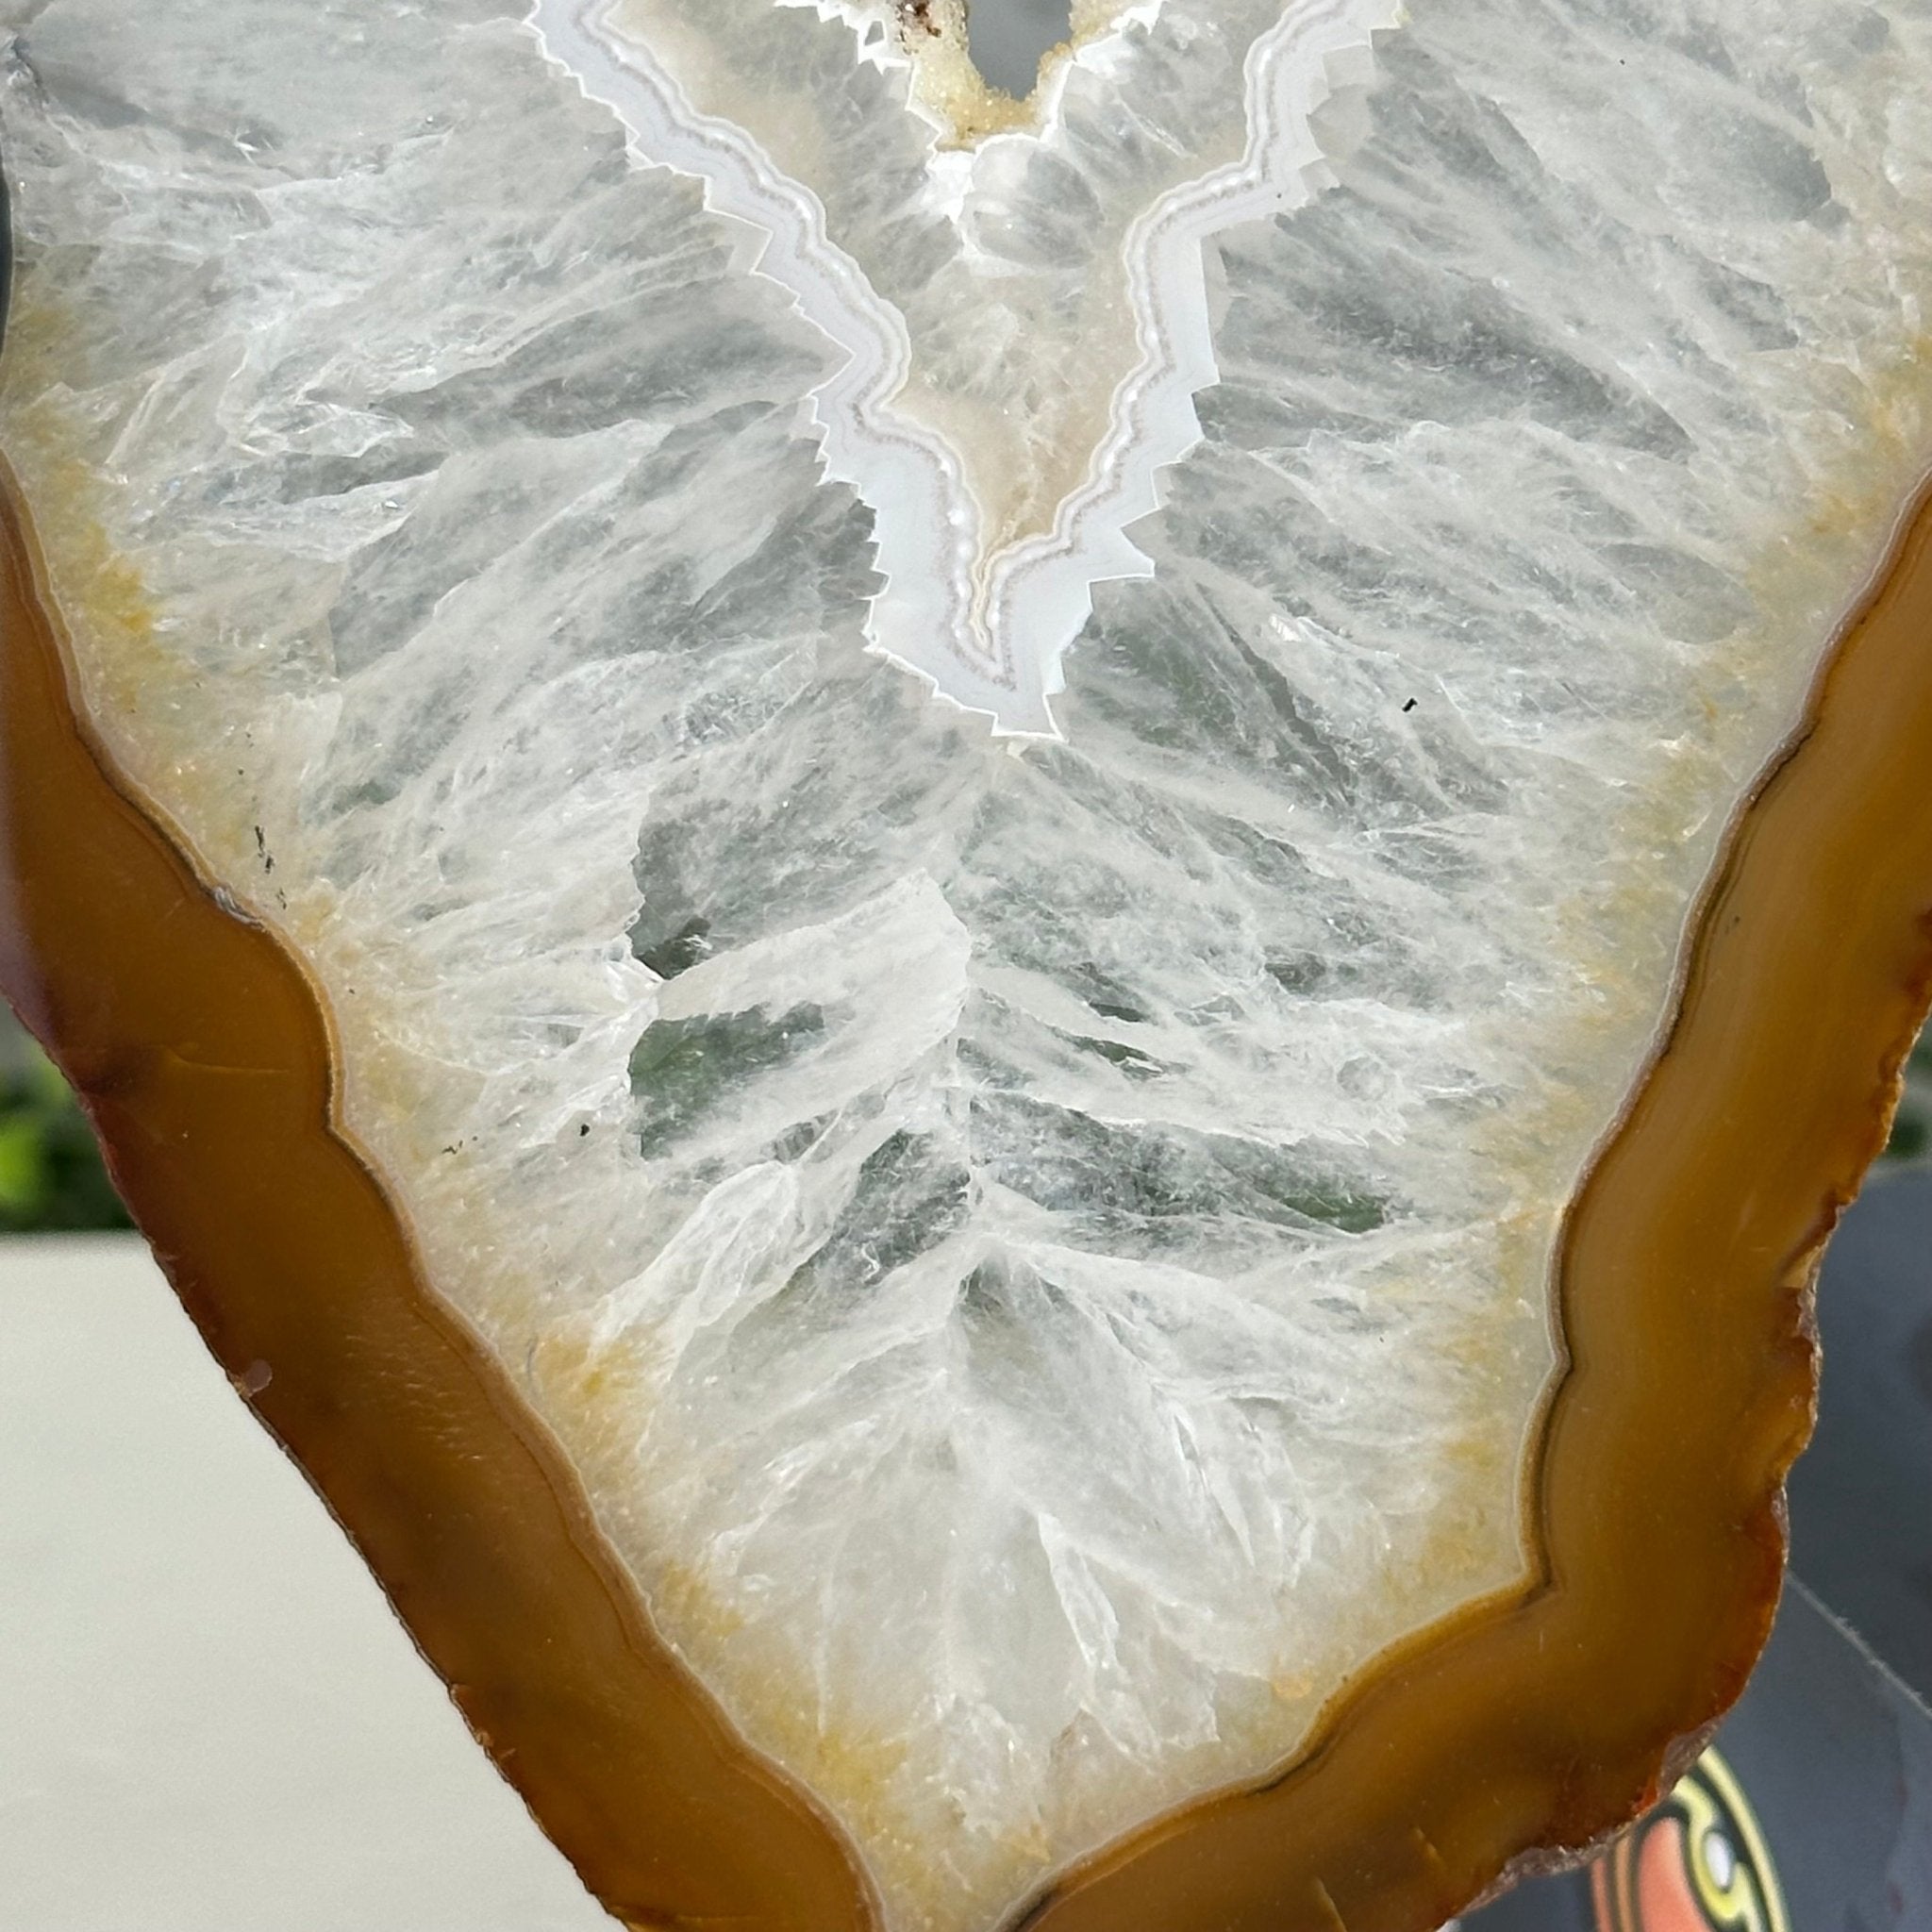 Natural Brazilian Agate "Butterfly Wings", 9.1" Tall #5050NA-110 - Brazil GemsBrazil GemsNatural Brazilian Agate "Butterfly Wings", 9.1" Tall #5050NA-110Agate Butterfly Wings5050NA-110